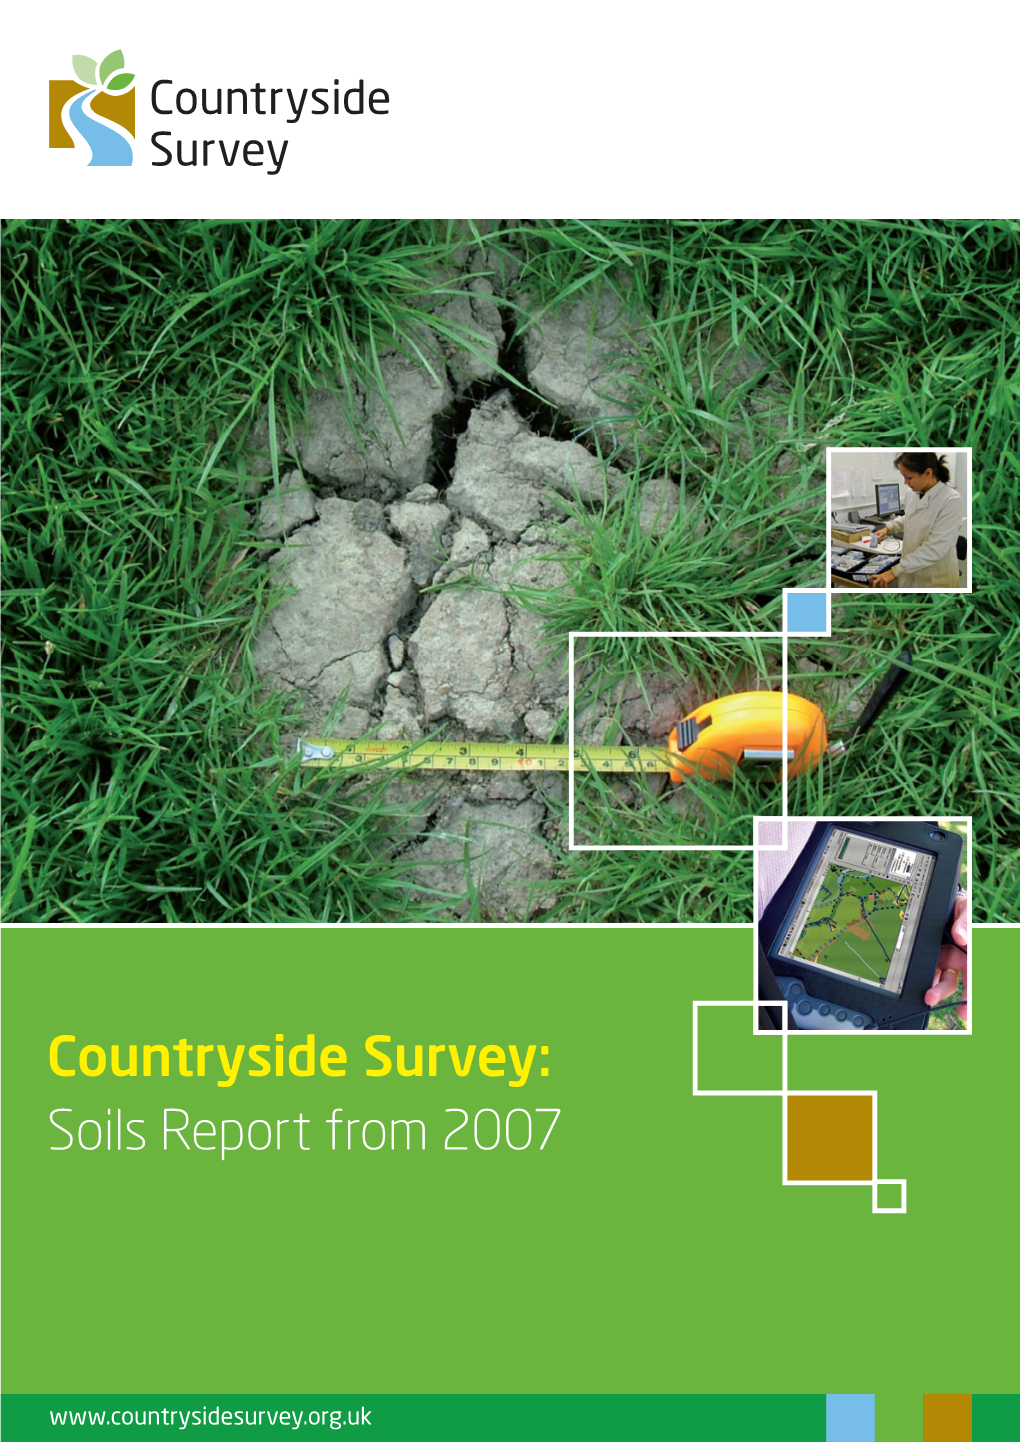 Countryside Survey: Soils Report from 2007